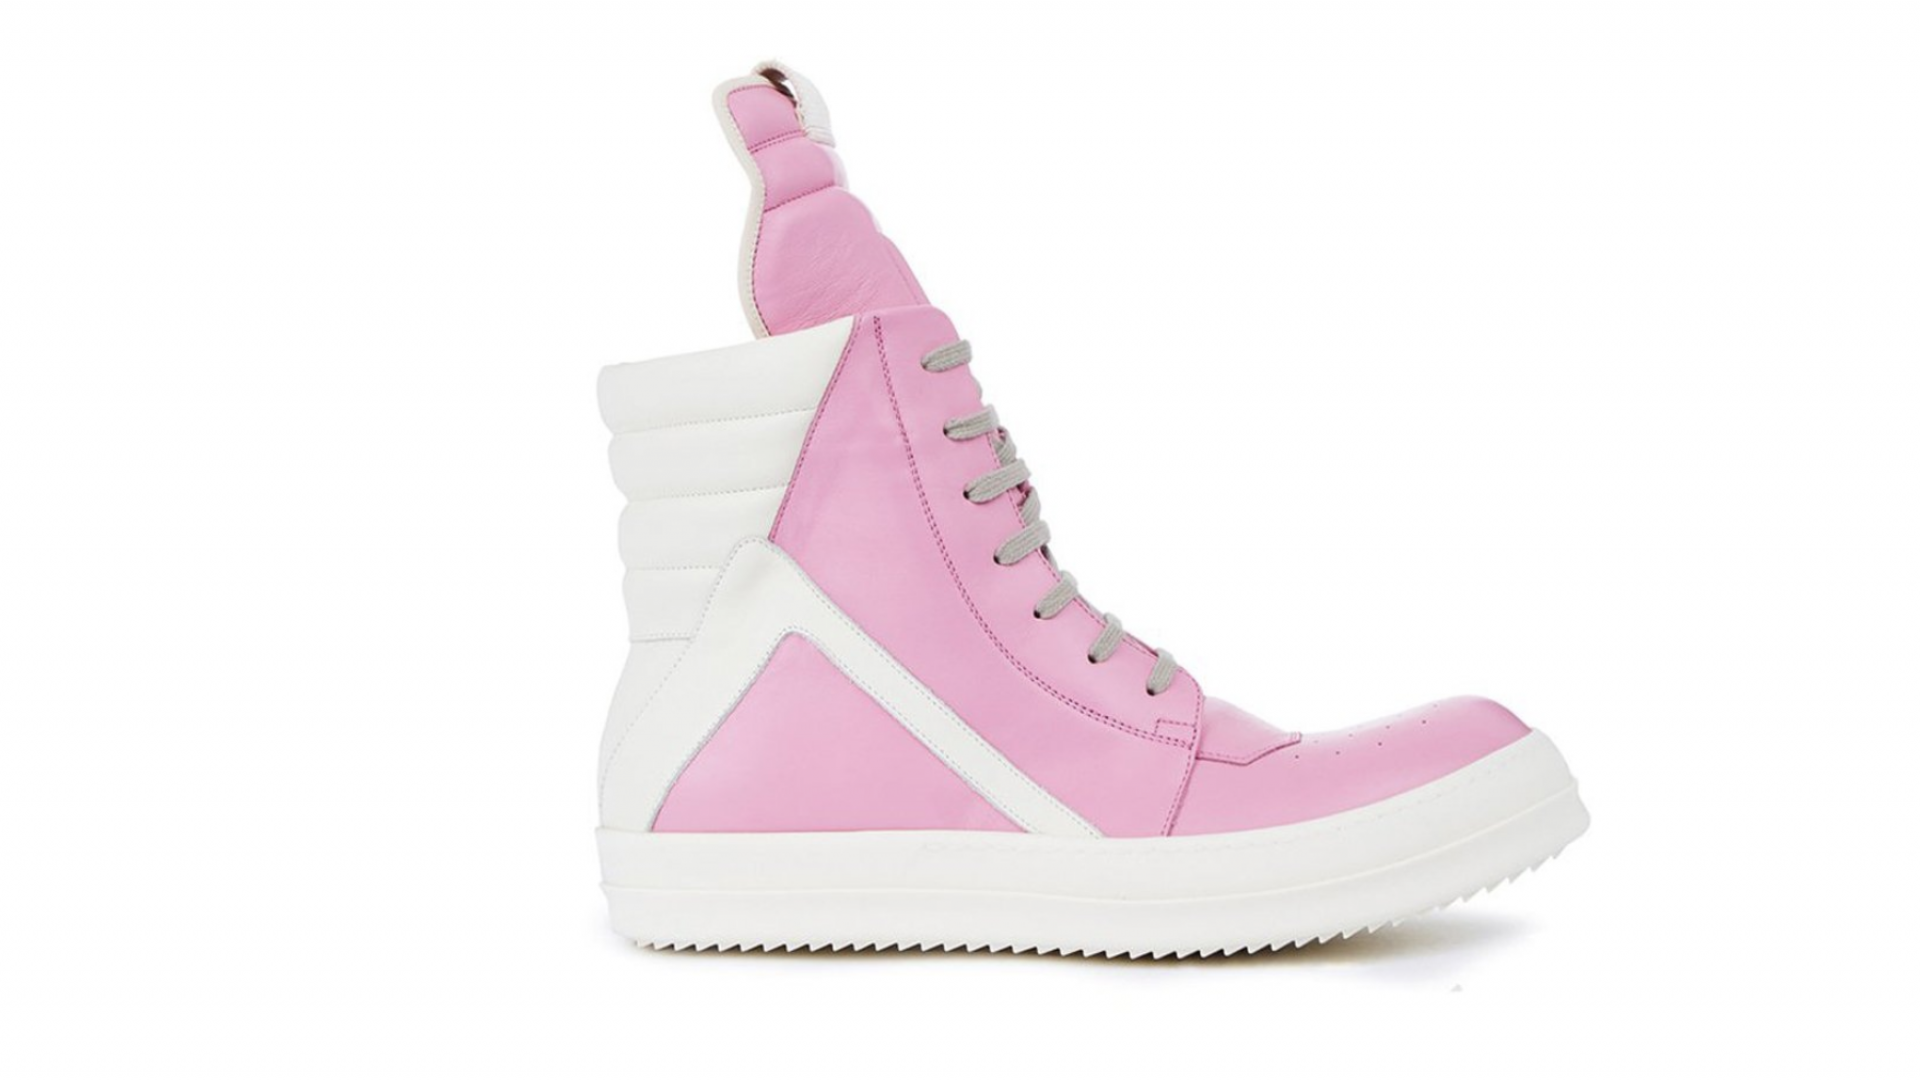 15 Sneakers To Add To Your Wardrobe This Spring